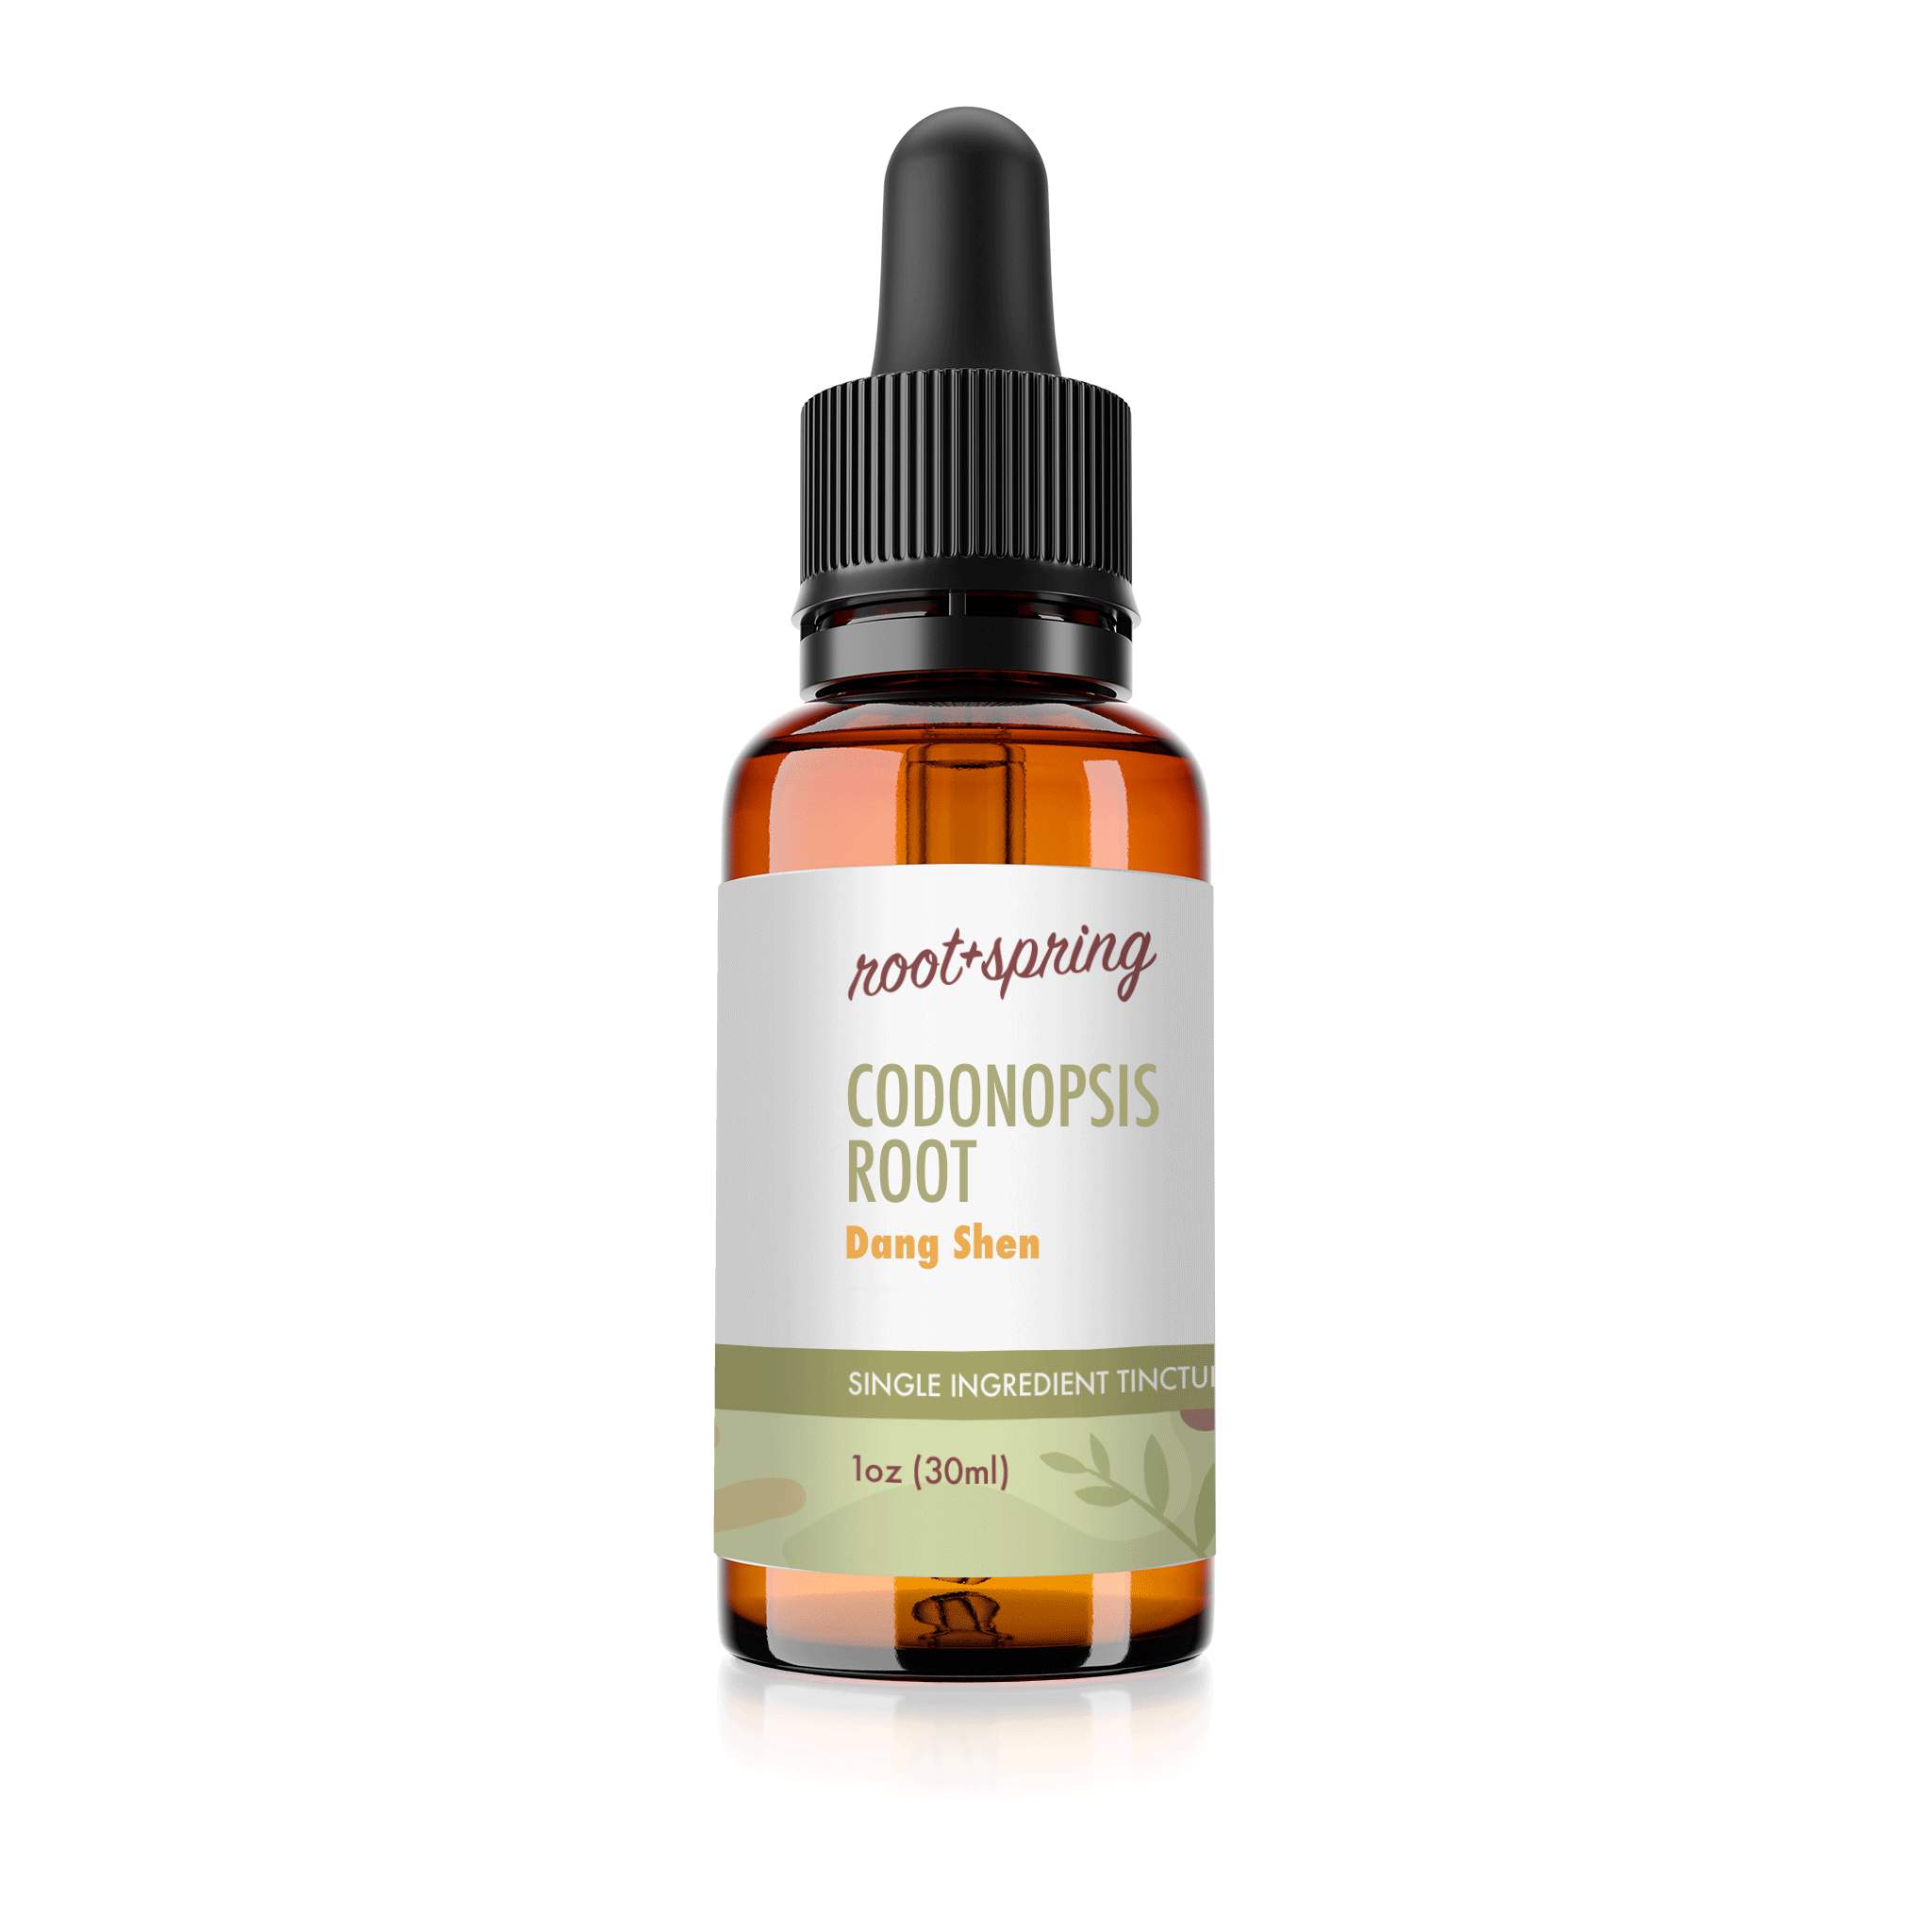 1 oz Glass Bottle of Codonopsis Root, or Dang Shen, Herbal Tincture by root + spring.